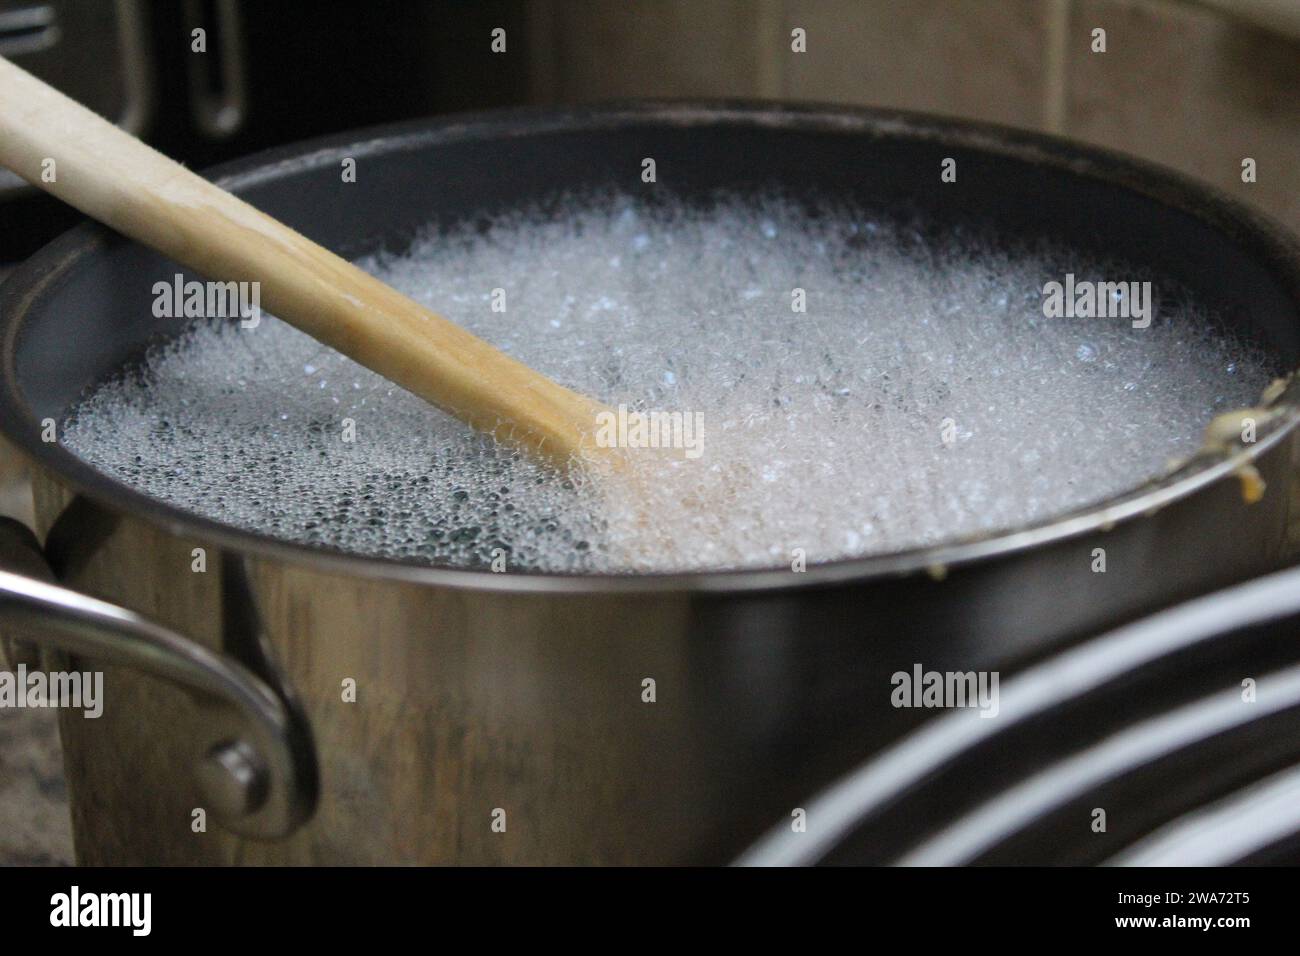 A close up photo of a wooden spoon in a kitchen pot full of suds and water. Stock Photo